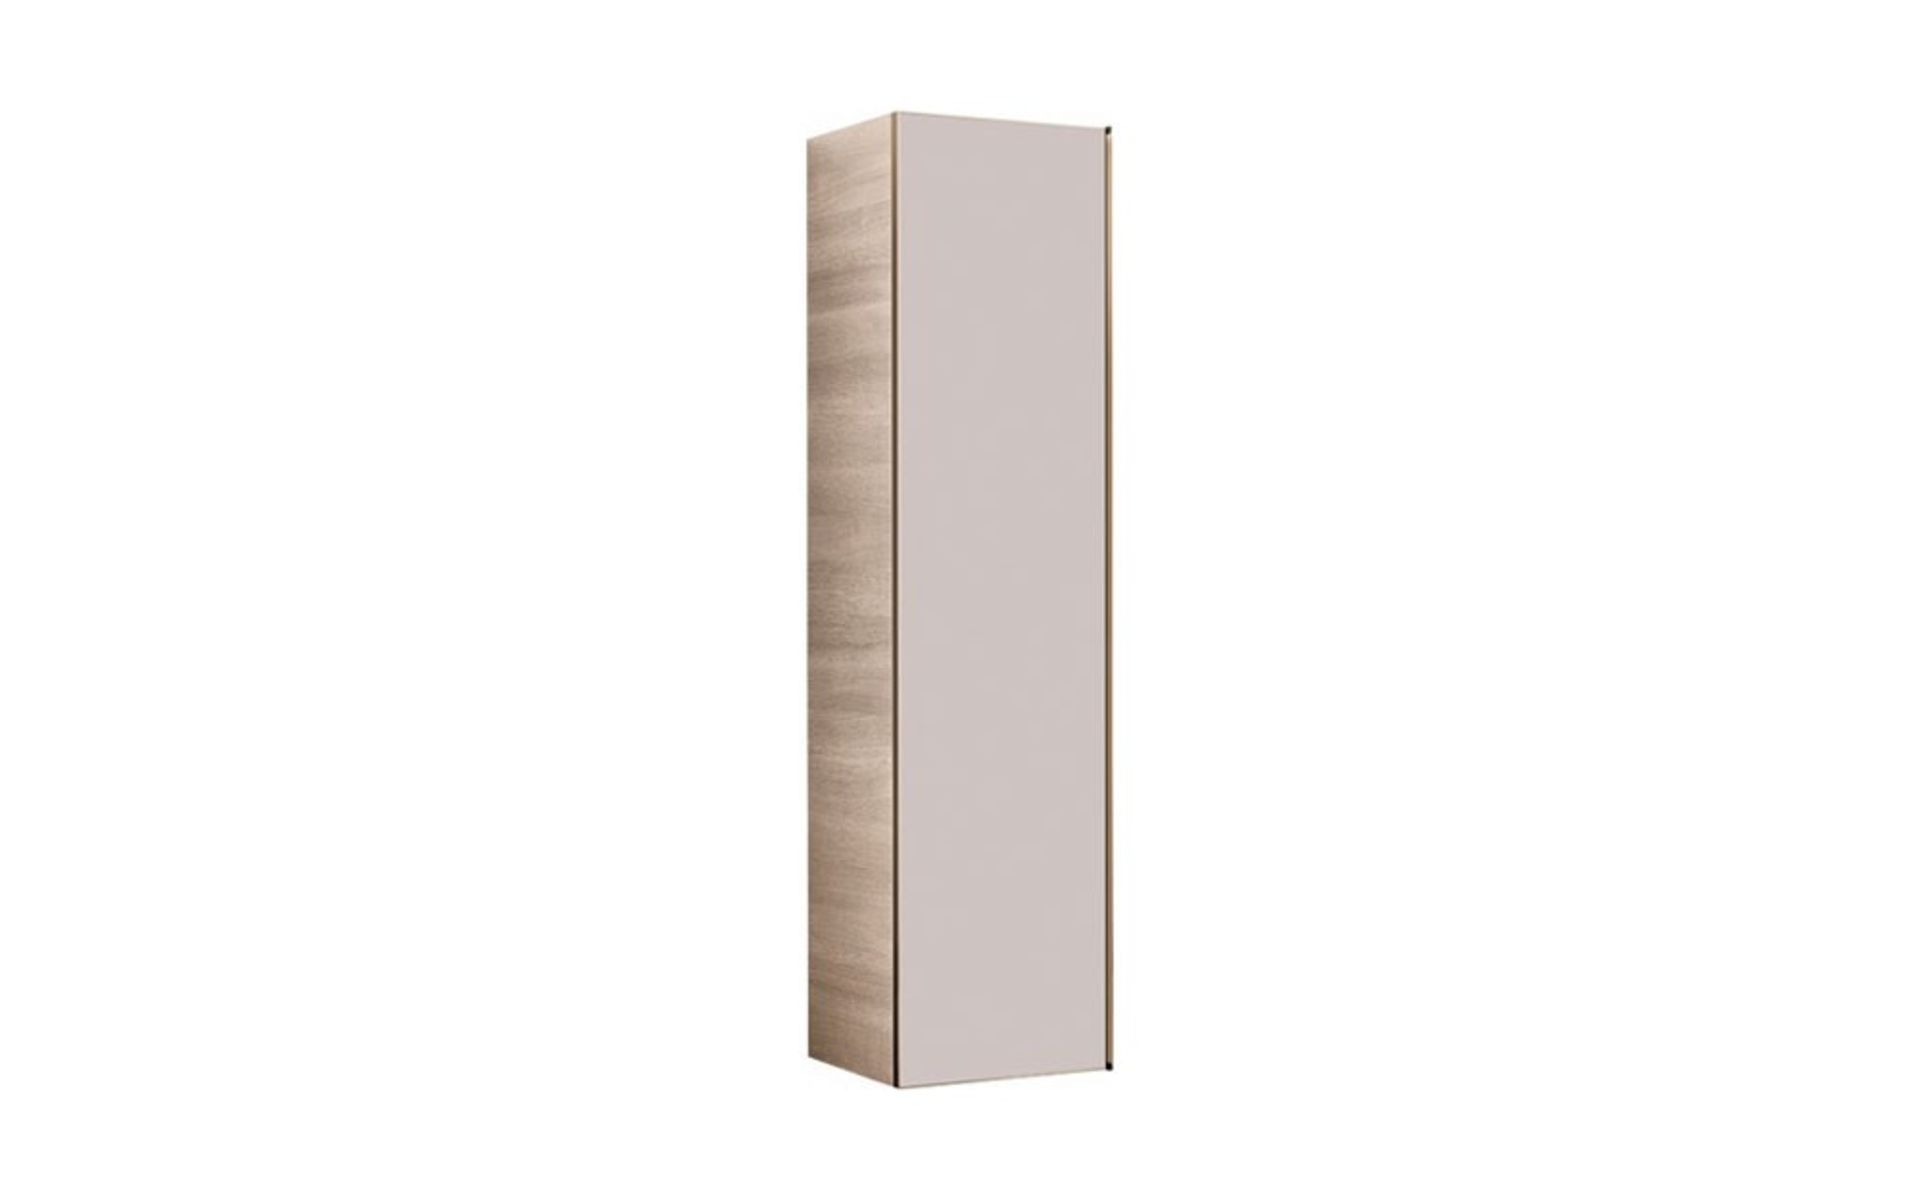 (XL139) Keramag 1600mm Citterio Natural Beige Tall Storage Cabinet 400x1600x371mm.RRP £899.99.... - Image 3 of 3